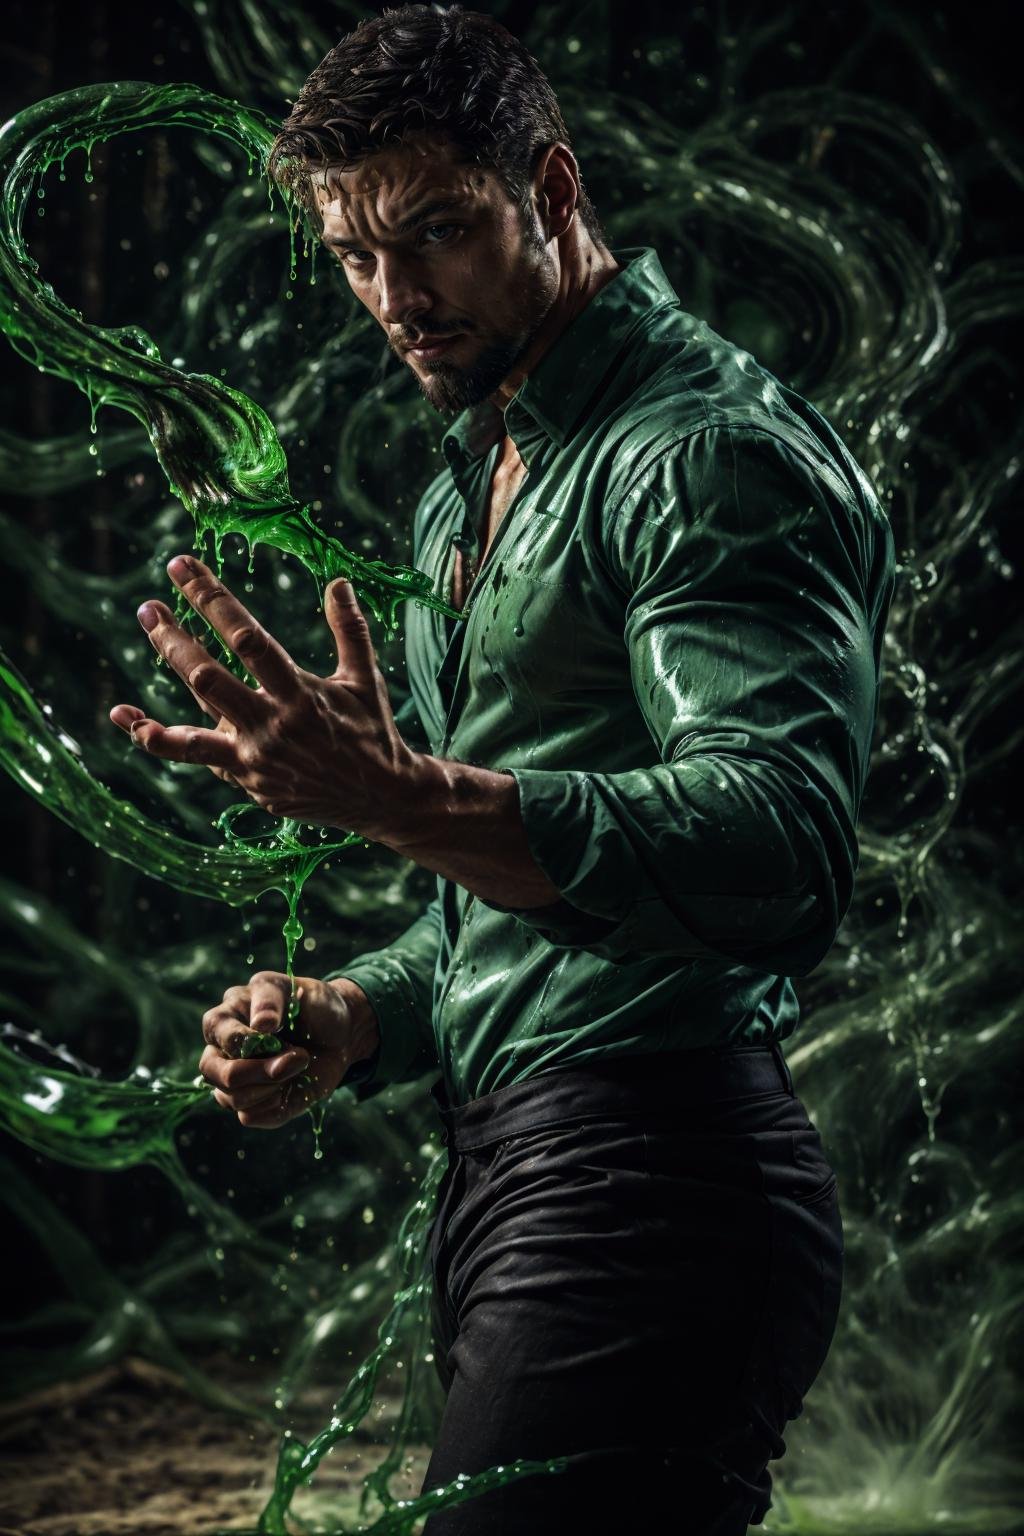 realistic, masterpiece, intricate details, detailed background, depth of field, photo of a handsome (british man), ven0mancer, venom hand, fighting stance, shirt, pants, from side, venom liquid, close up, face portrait, covered in green liquid,